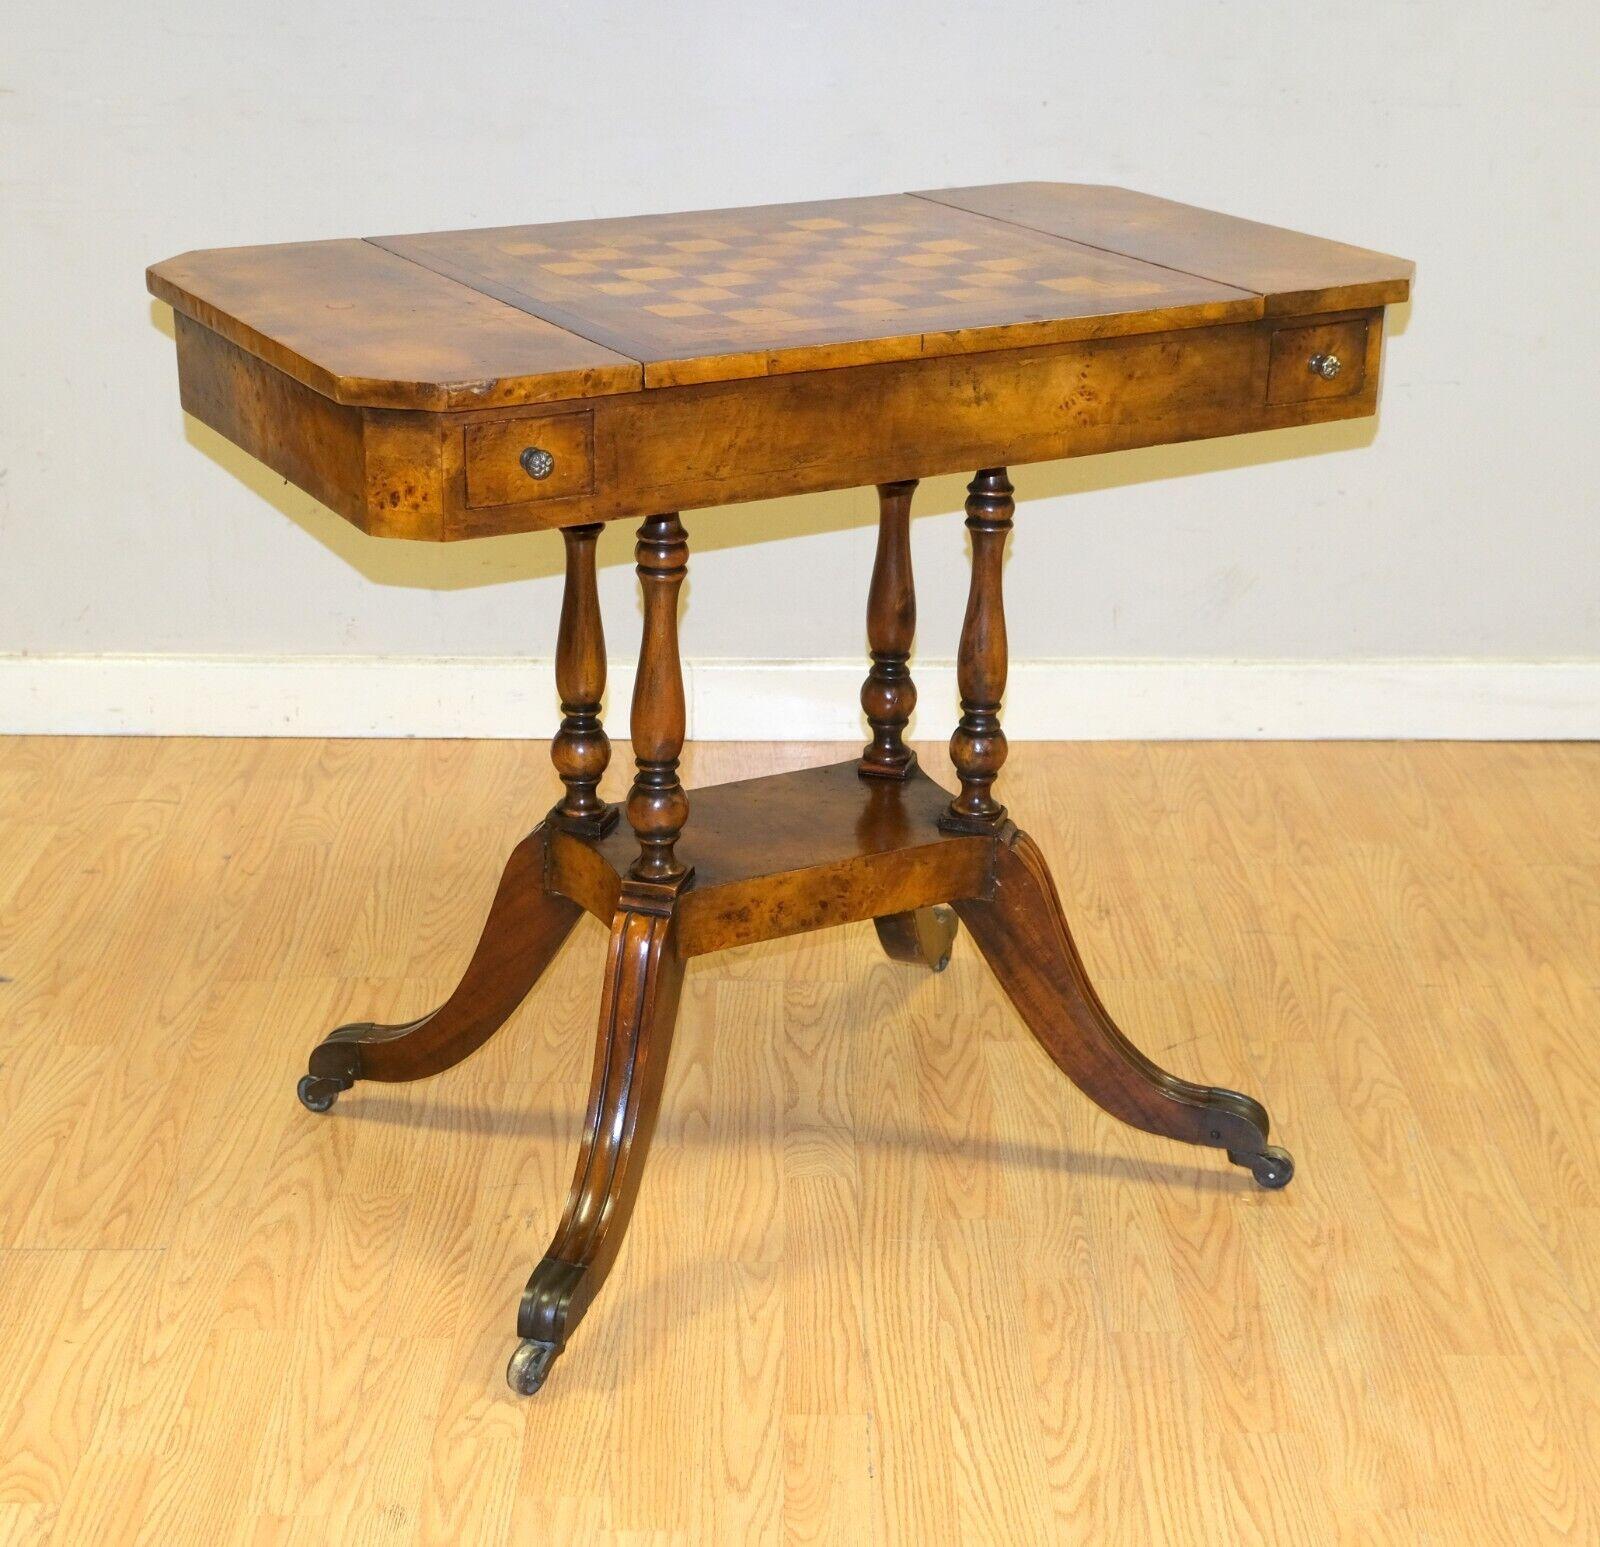 We are delighted to offer for sale this stunning Theodore Alexander burr walnut brown leather top games table.

This well made games table shows a lot of character with a beautiful patina all around, making this piece eye catching from any point of